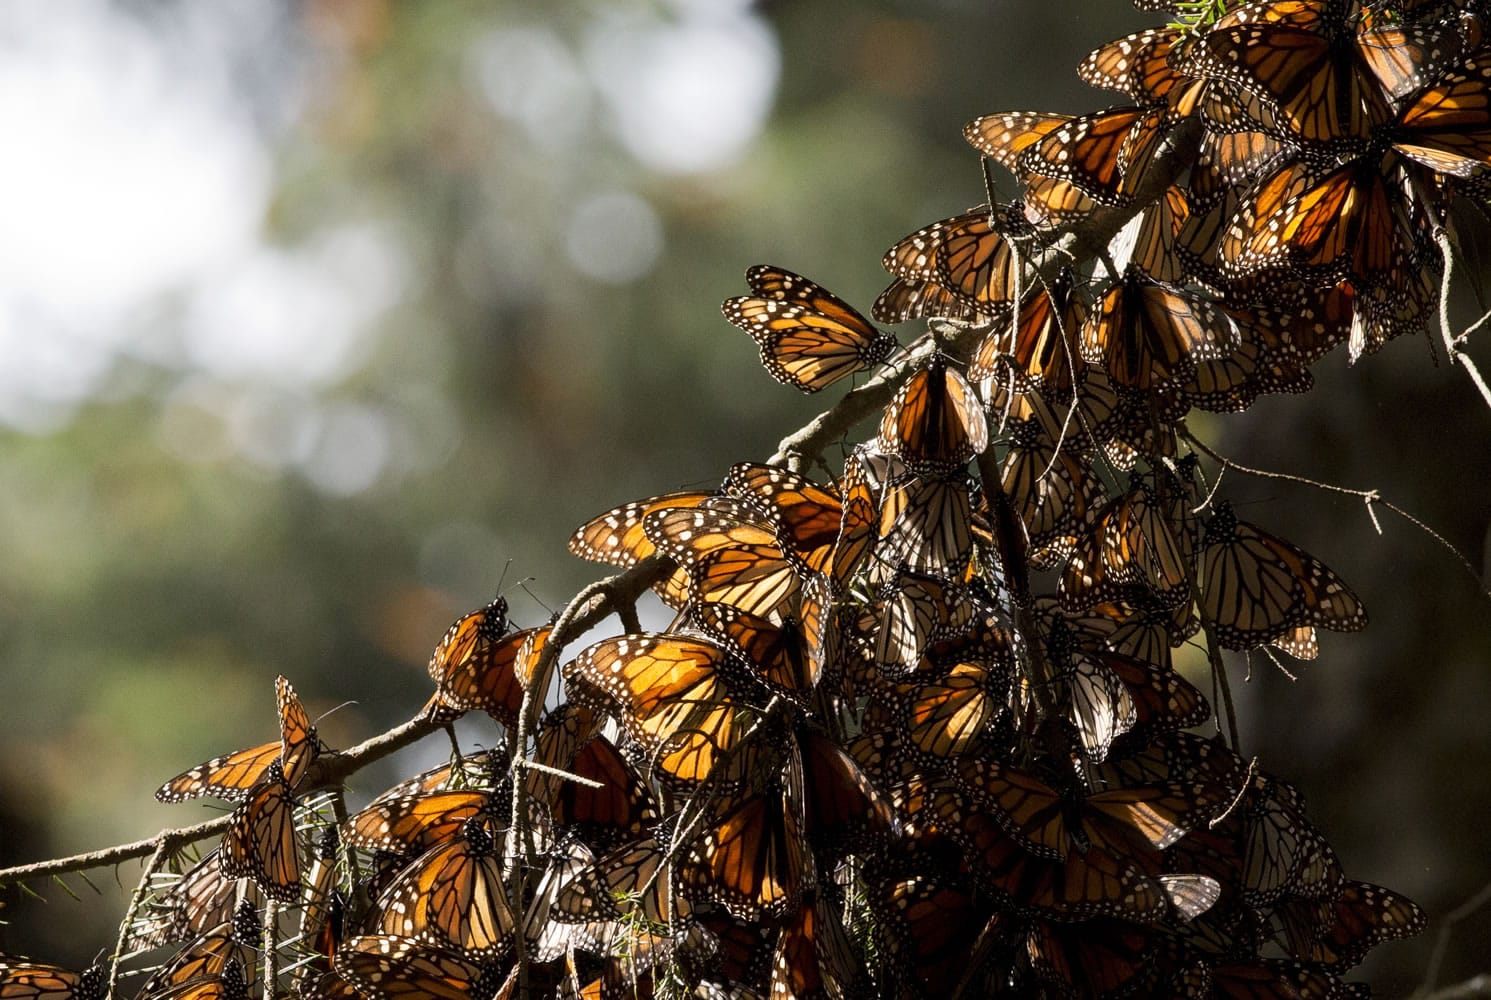 FILE - In this Jan. 4, 2015 file photo, a kaleidoscope of Monarch butterflies hang from a tree branch, in the Piedra Herrada sanctuary, near Valle de Bravo, Mexico. Illegal logging has almost tripled in the monarch butterfly&iacute;s wintering grounds in central Mexico, reversing several years of steady improvements. Almost all of the loss occurred in San Felipe de los Alzati, in the state of Michoacan, over the past year, while little was lost in 31 other communities, according to a Tuesday, Aug. 25, 2015 announcement by the World Wildlife fund and the Institute of Biology of Mexico&iacute;s National Autonomous University.